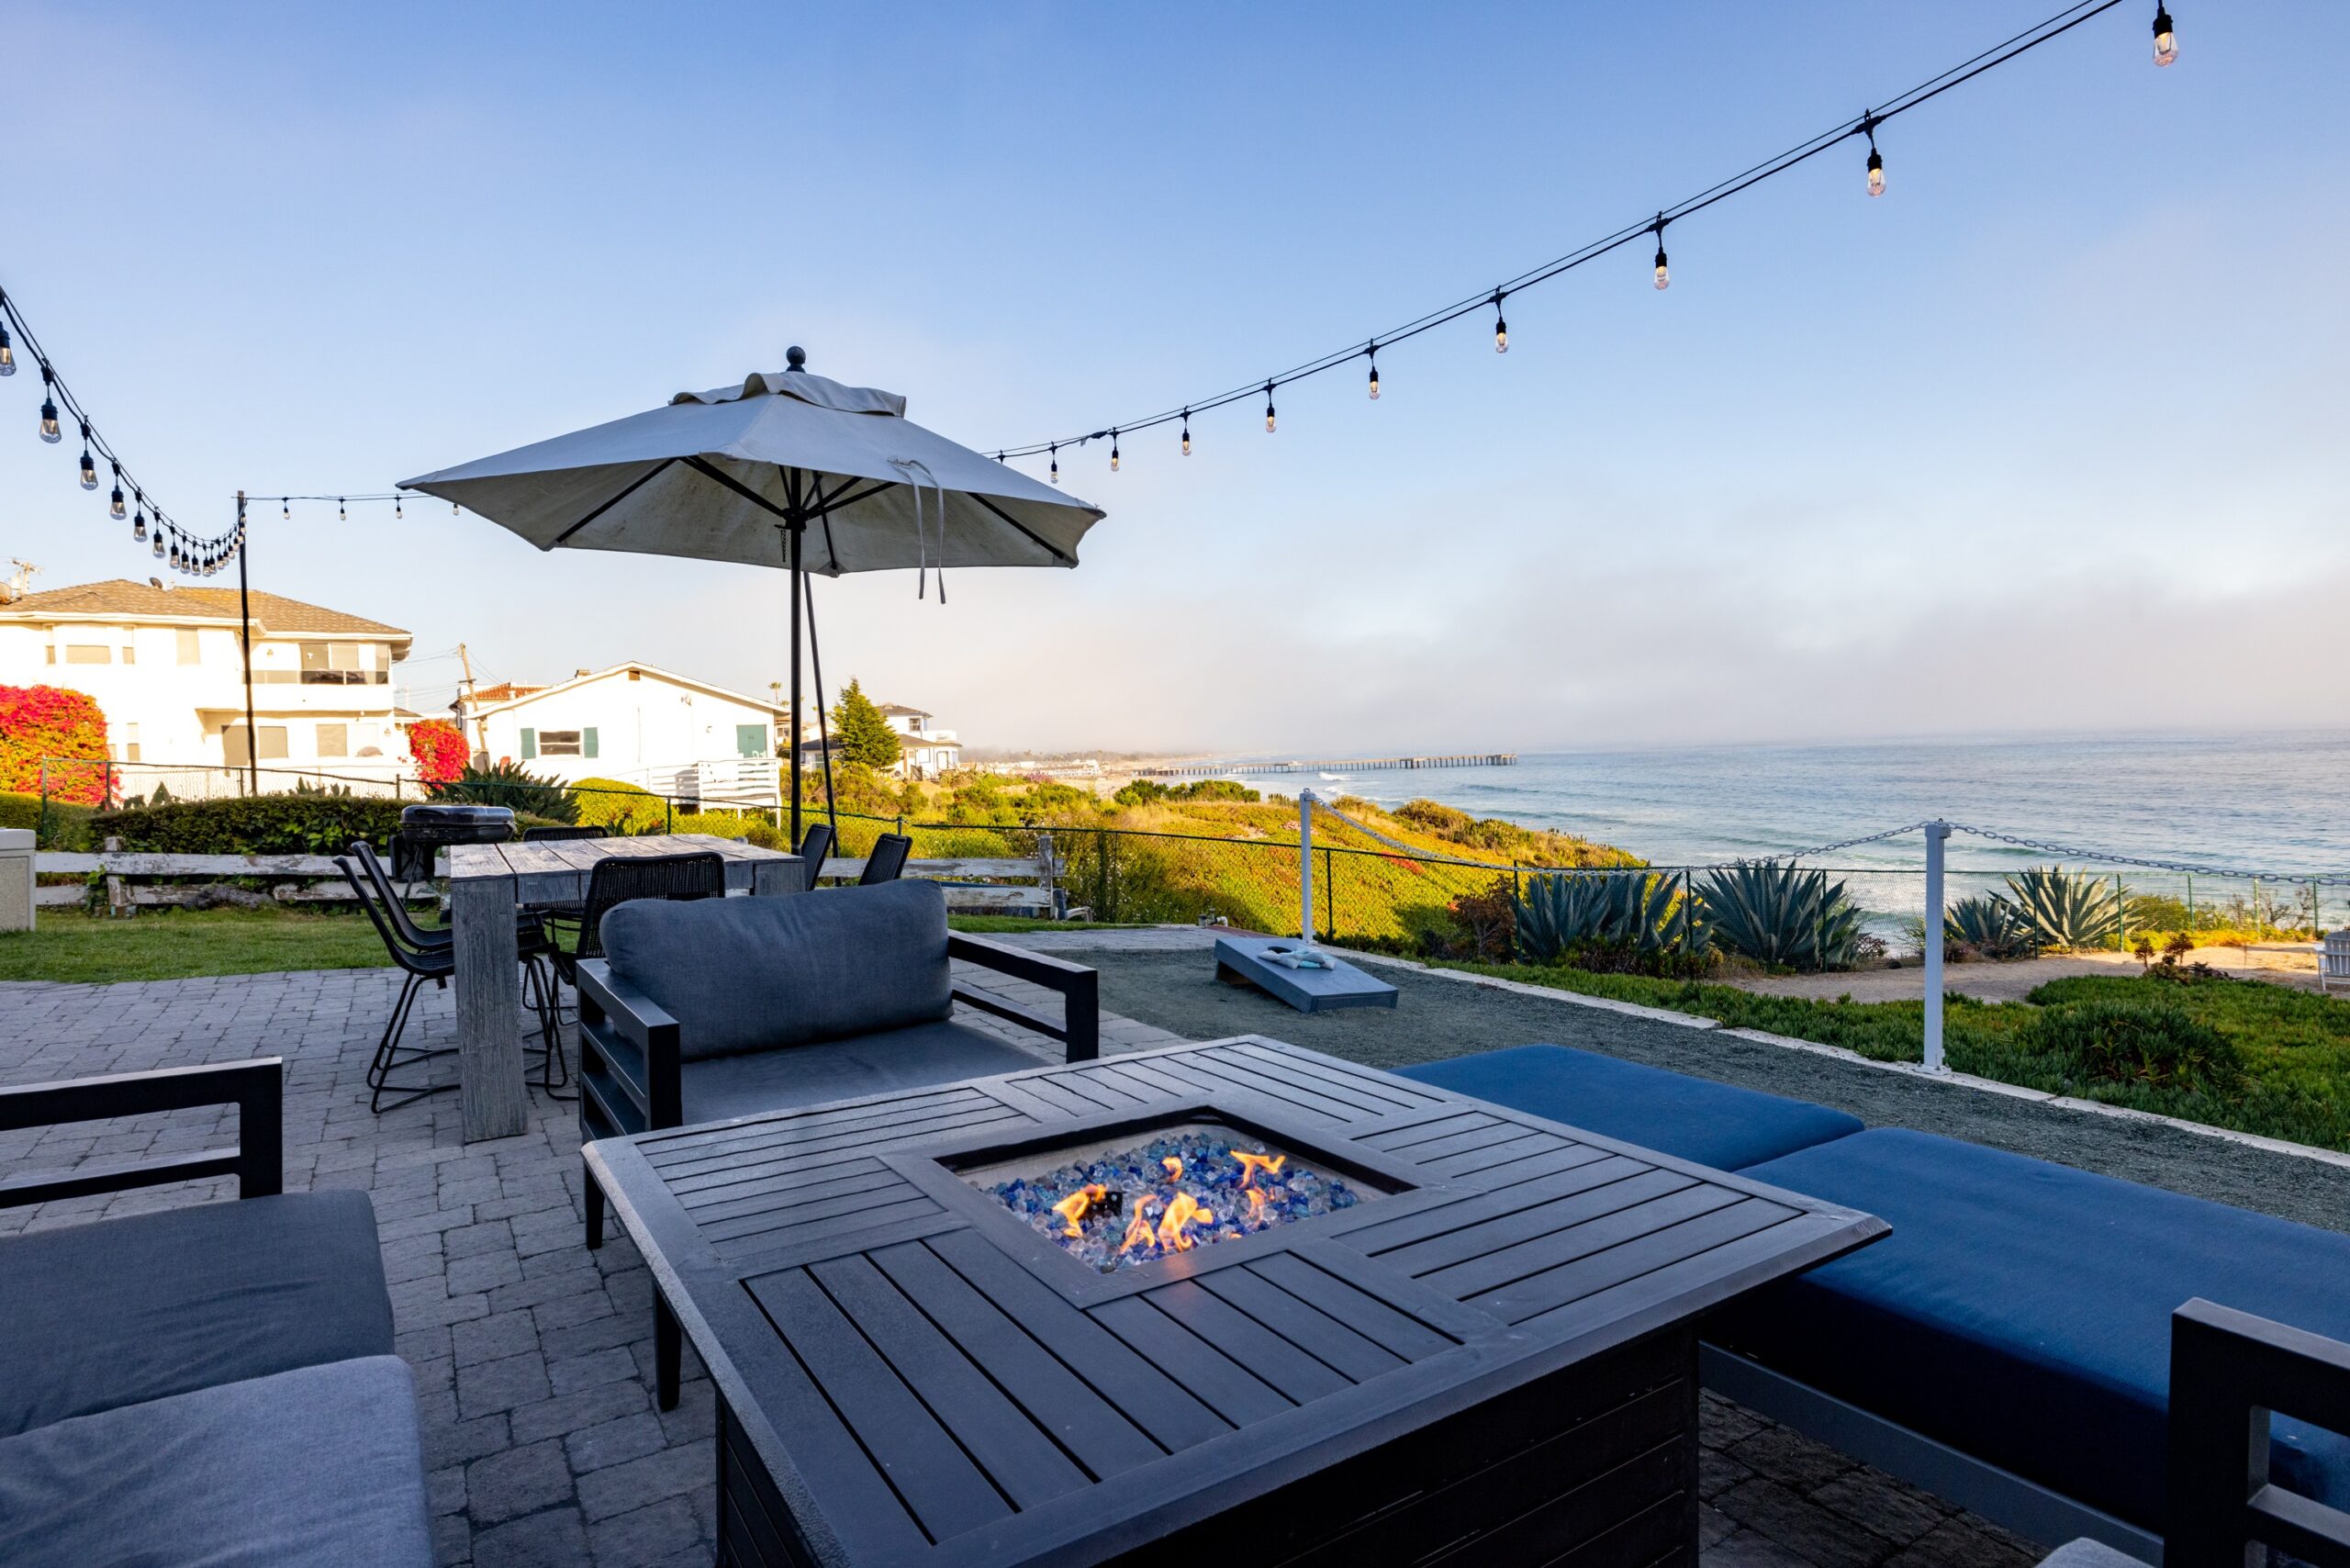 Fire pit and umbrella on patio with ocean view